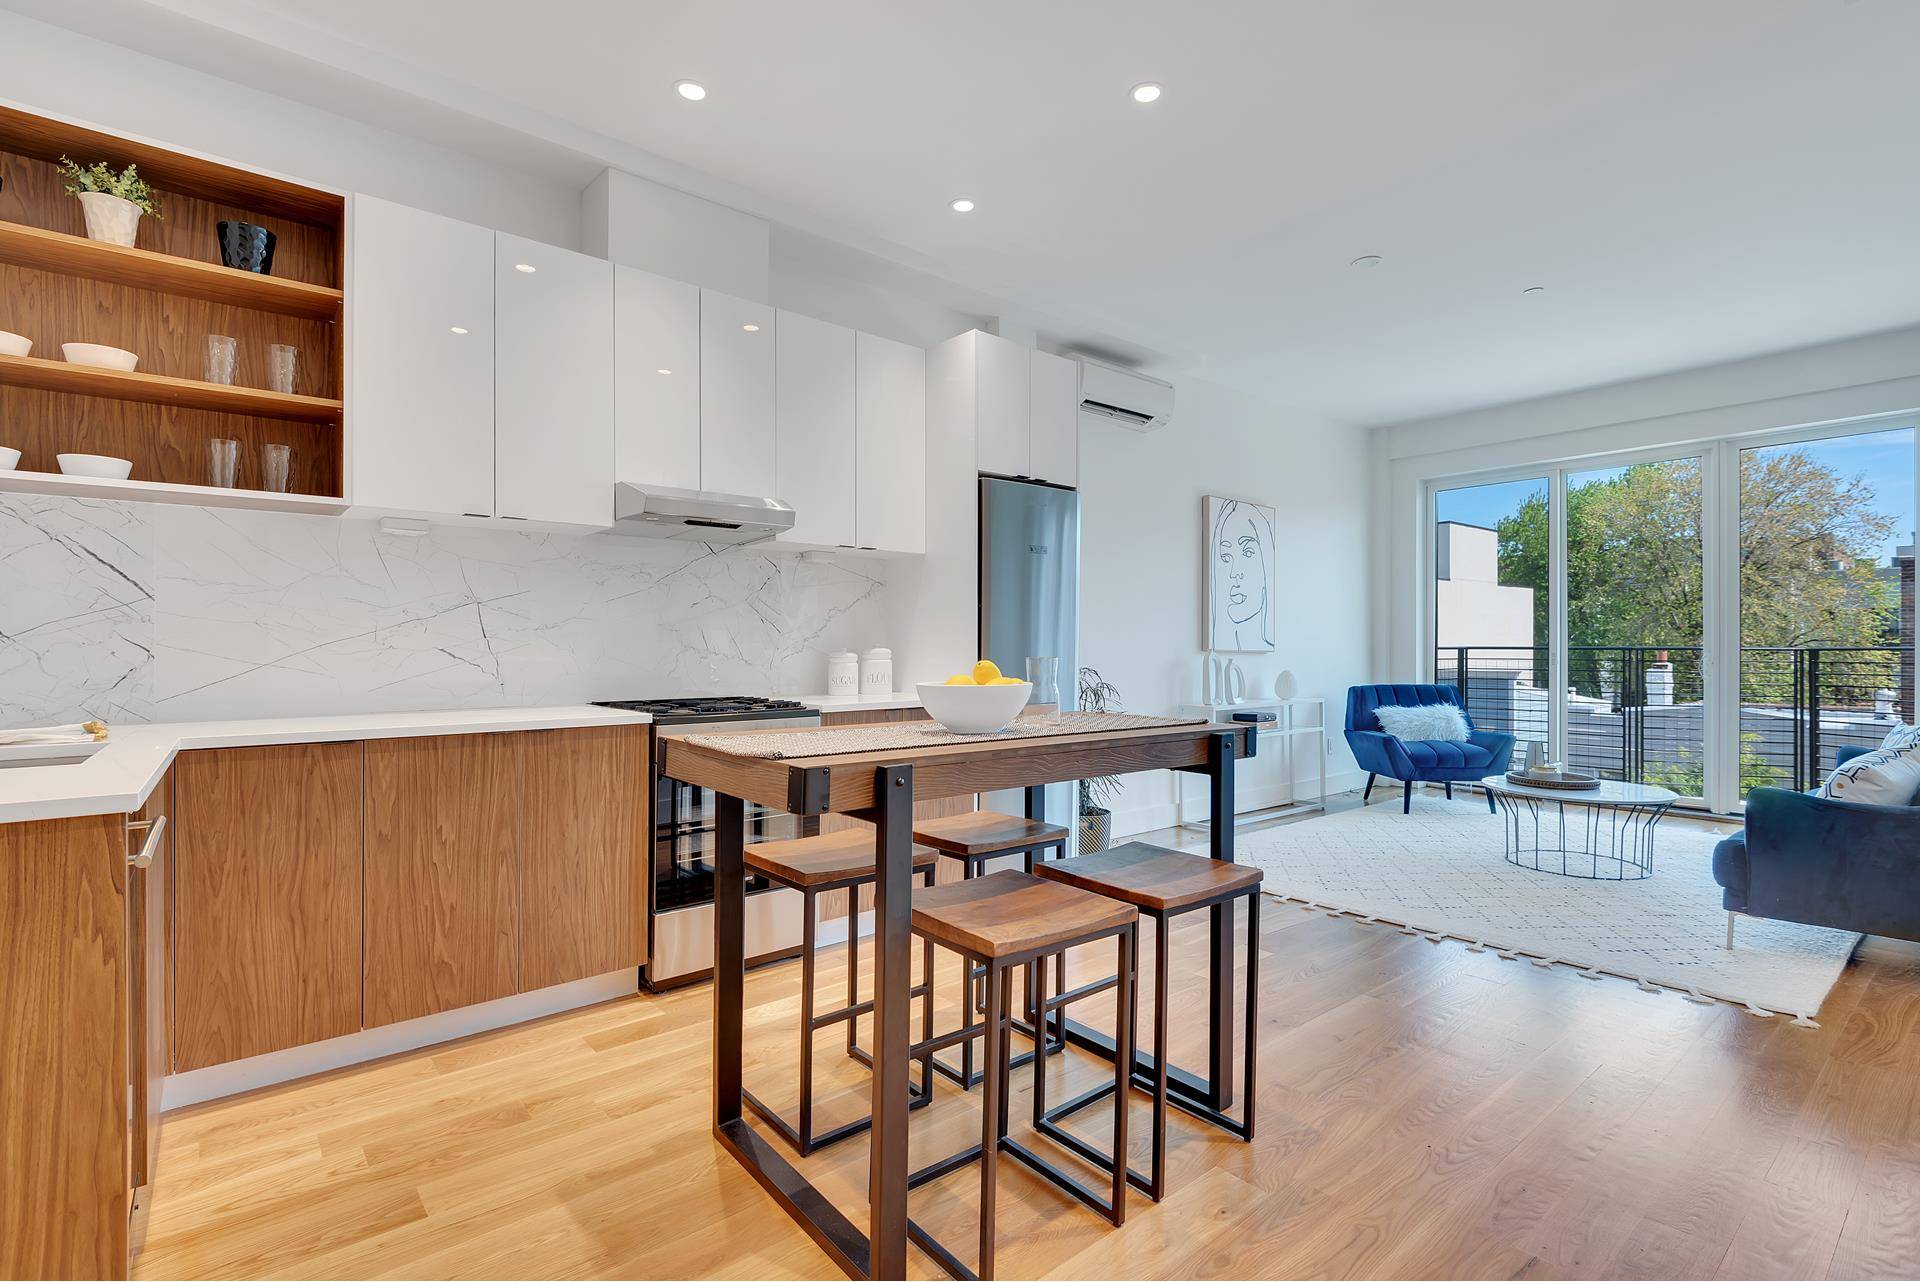 Sleek and stunning, brand new boutique condo development in the sought after Greenwood section of Park Slope, featuring 4 wonderful luxury residences with upscale modern finishes and private outdoor space.